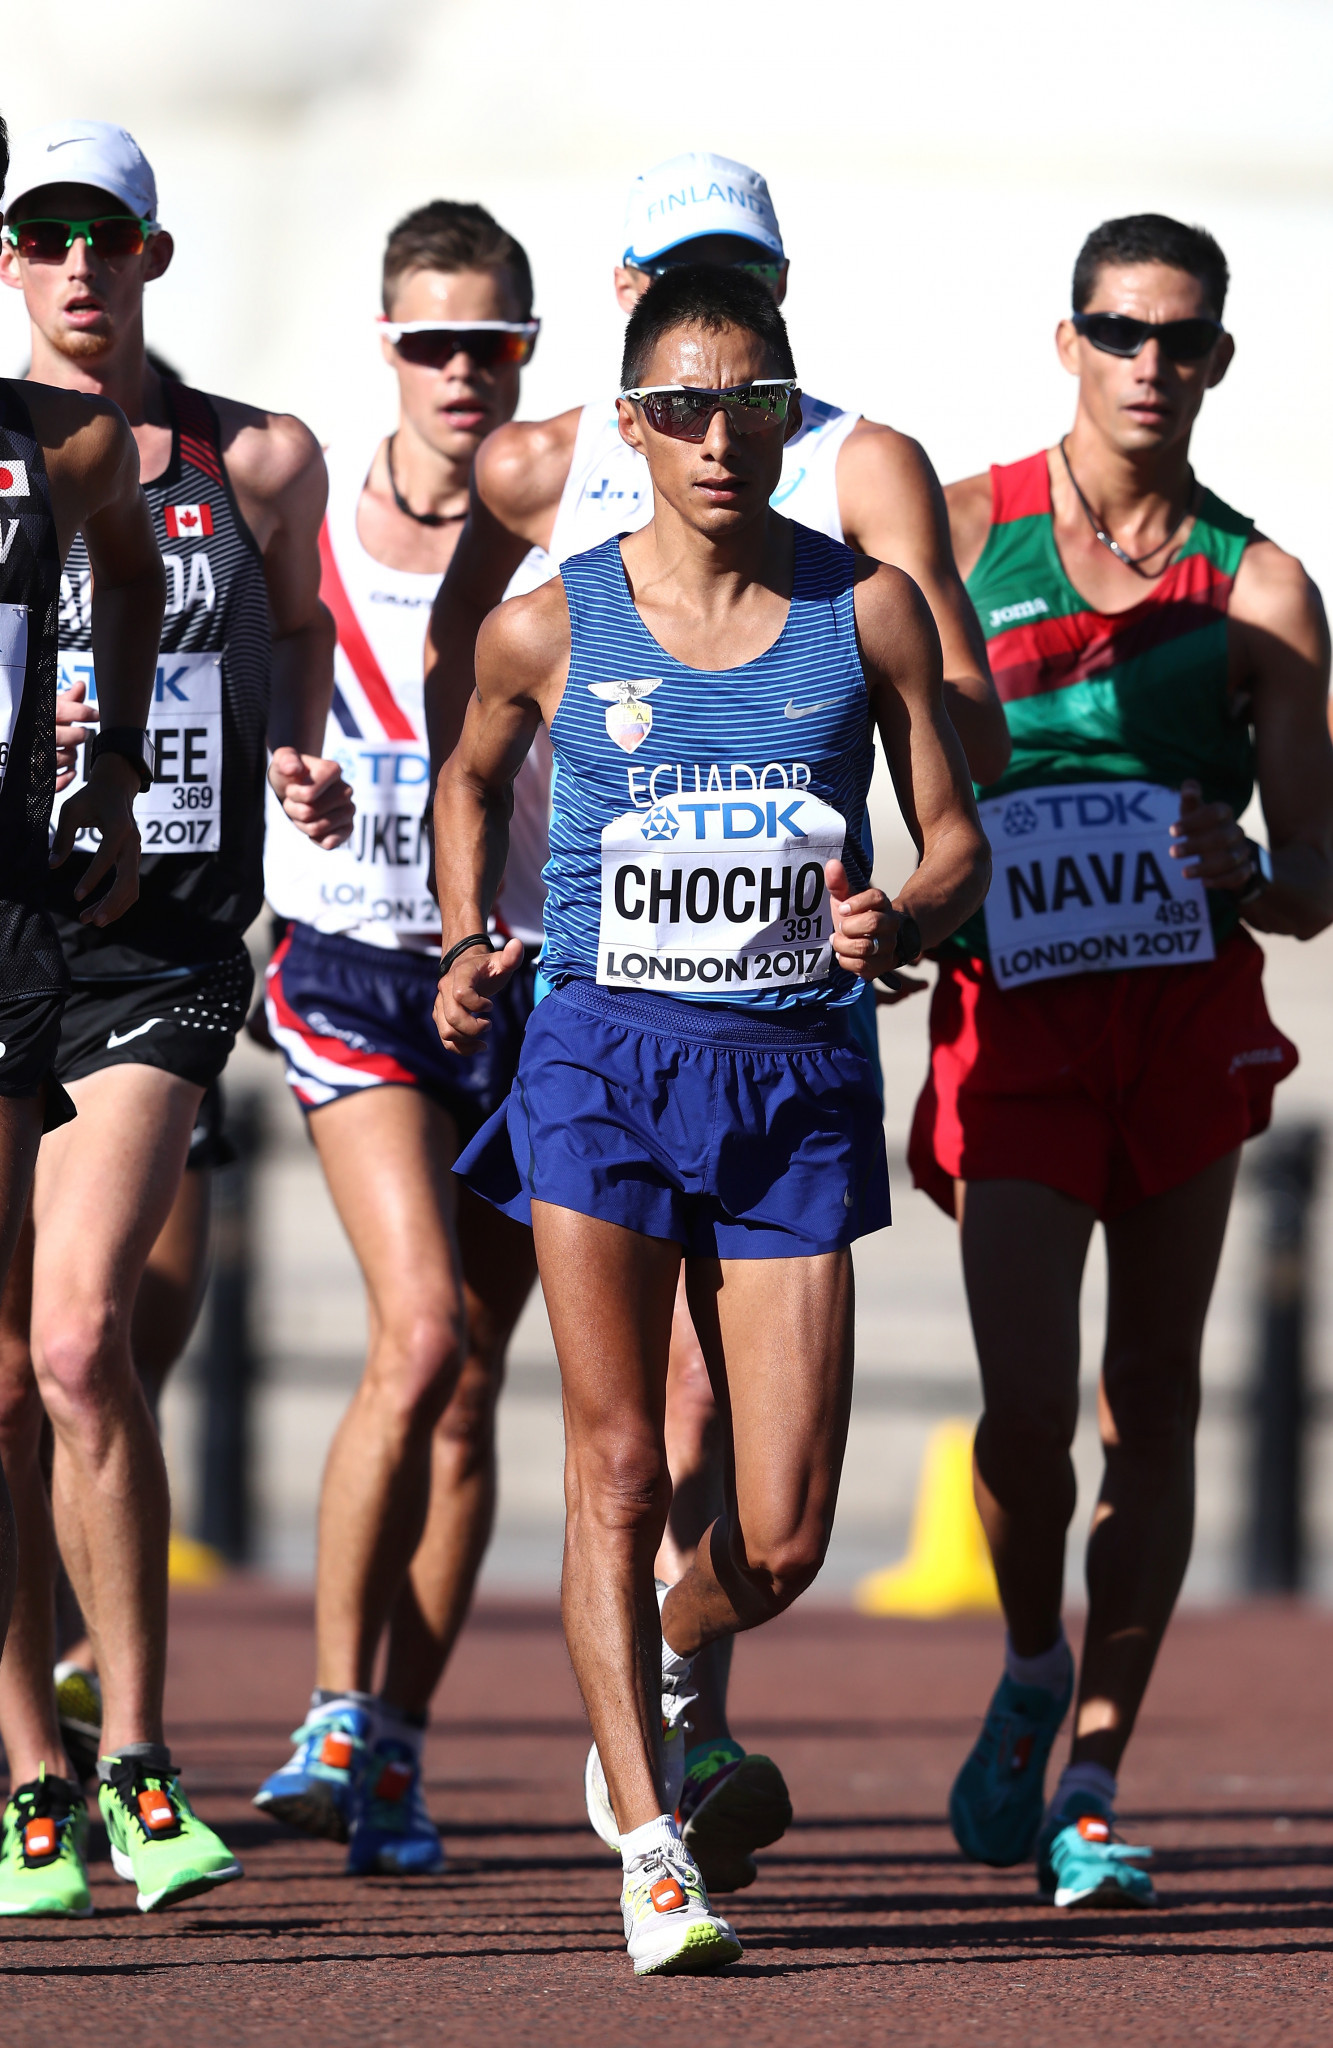 Ecuador's Andres Chocho will defend his lead in the IAAF World Race Walking Challenge as he competes in Rio Maior, Portugal tomorrow ©Getty Images